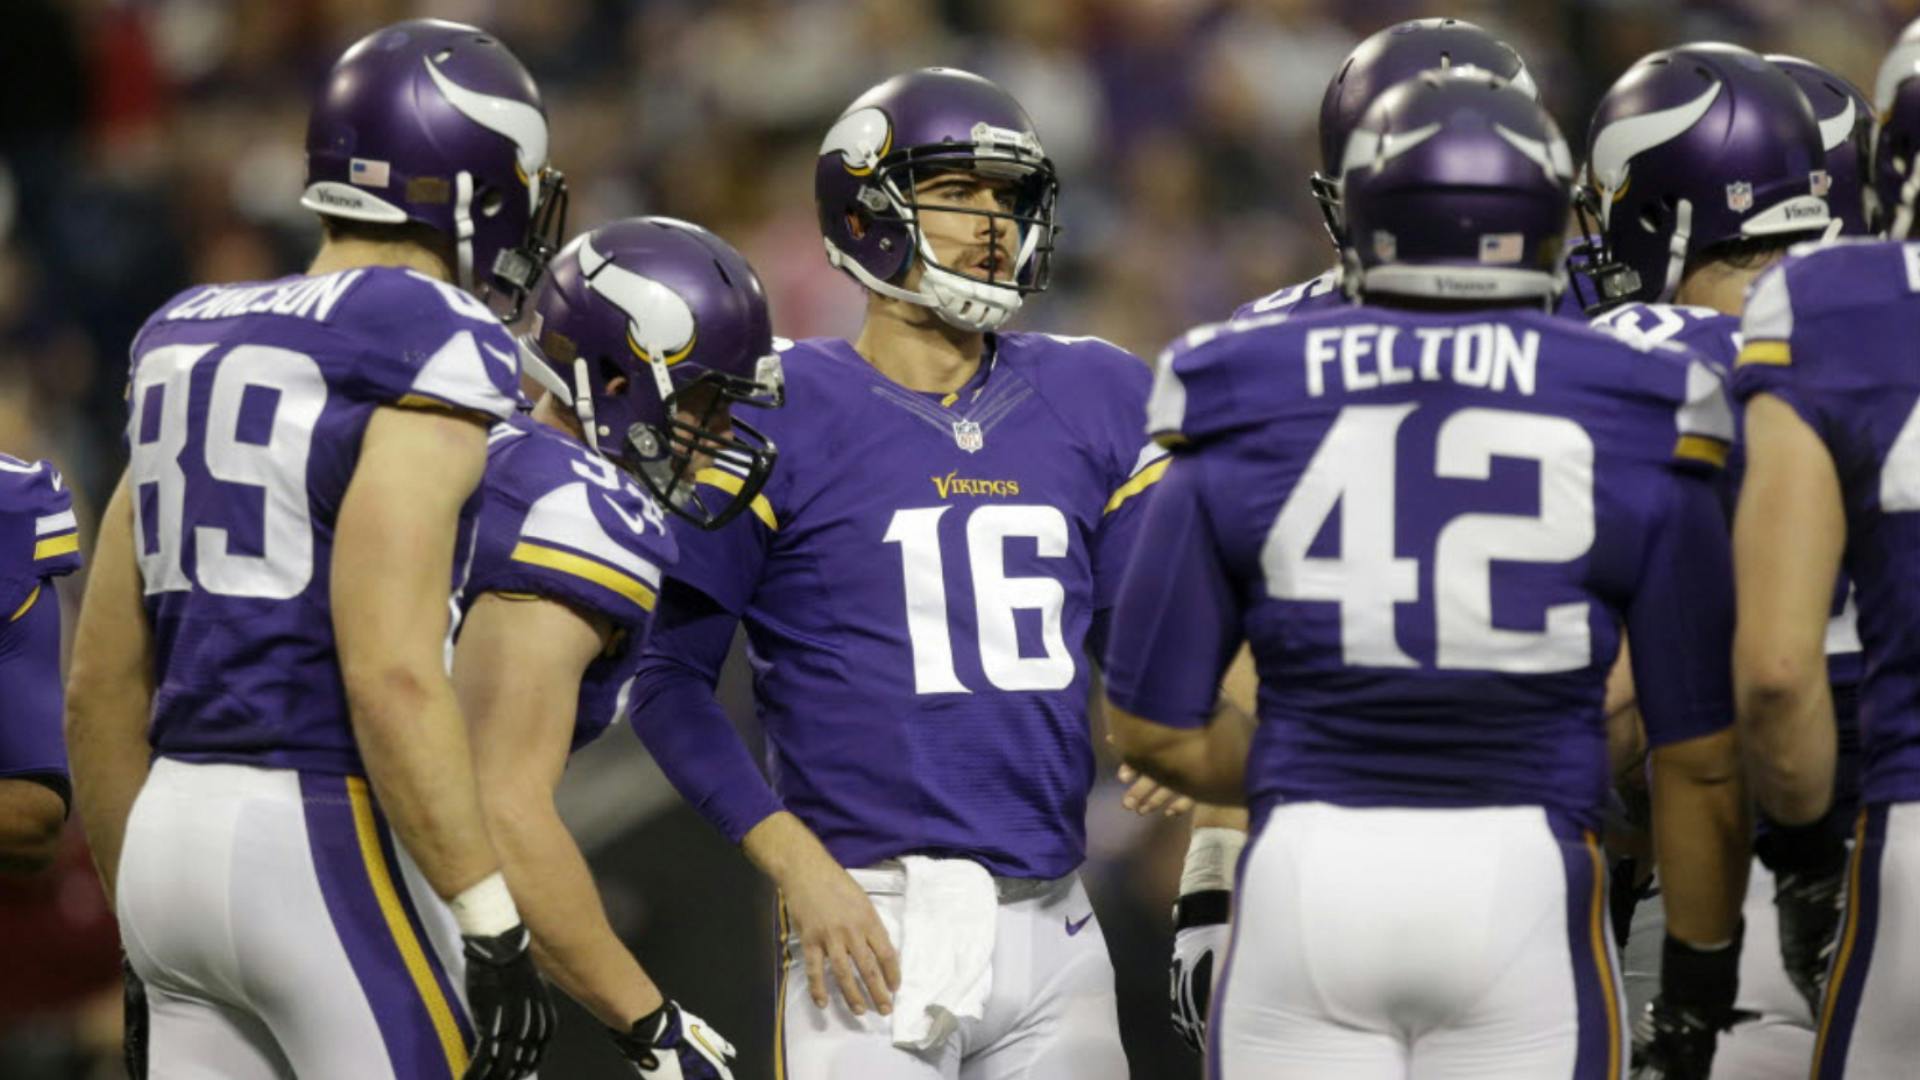 Vikings head coach Leslie Frazier said quarterback Christian Ponder hasn't passed concussion tests and Matt Cassel is expected to start on Sunday against the Baltimore Ravens.